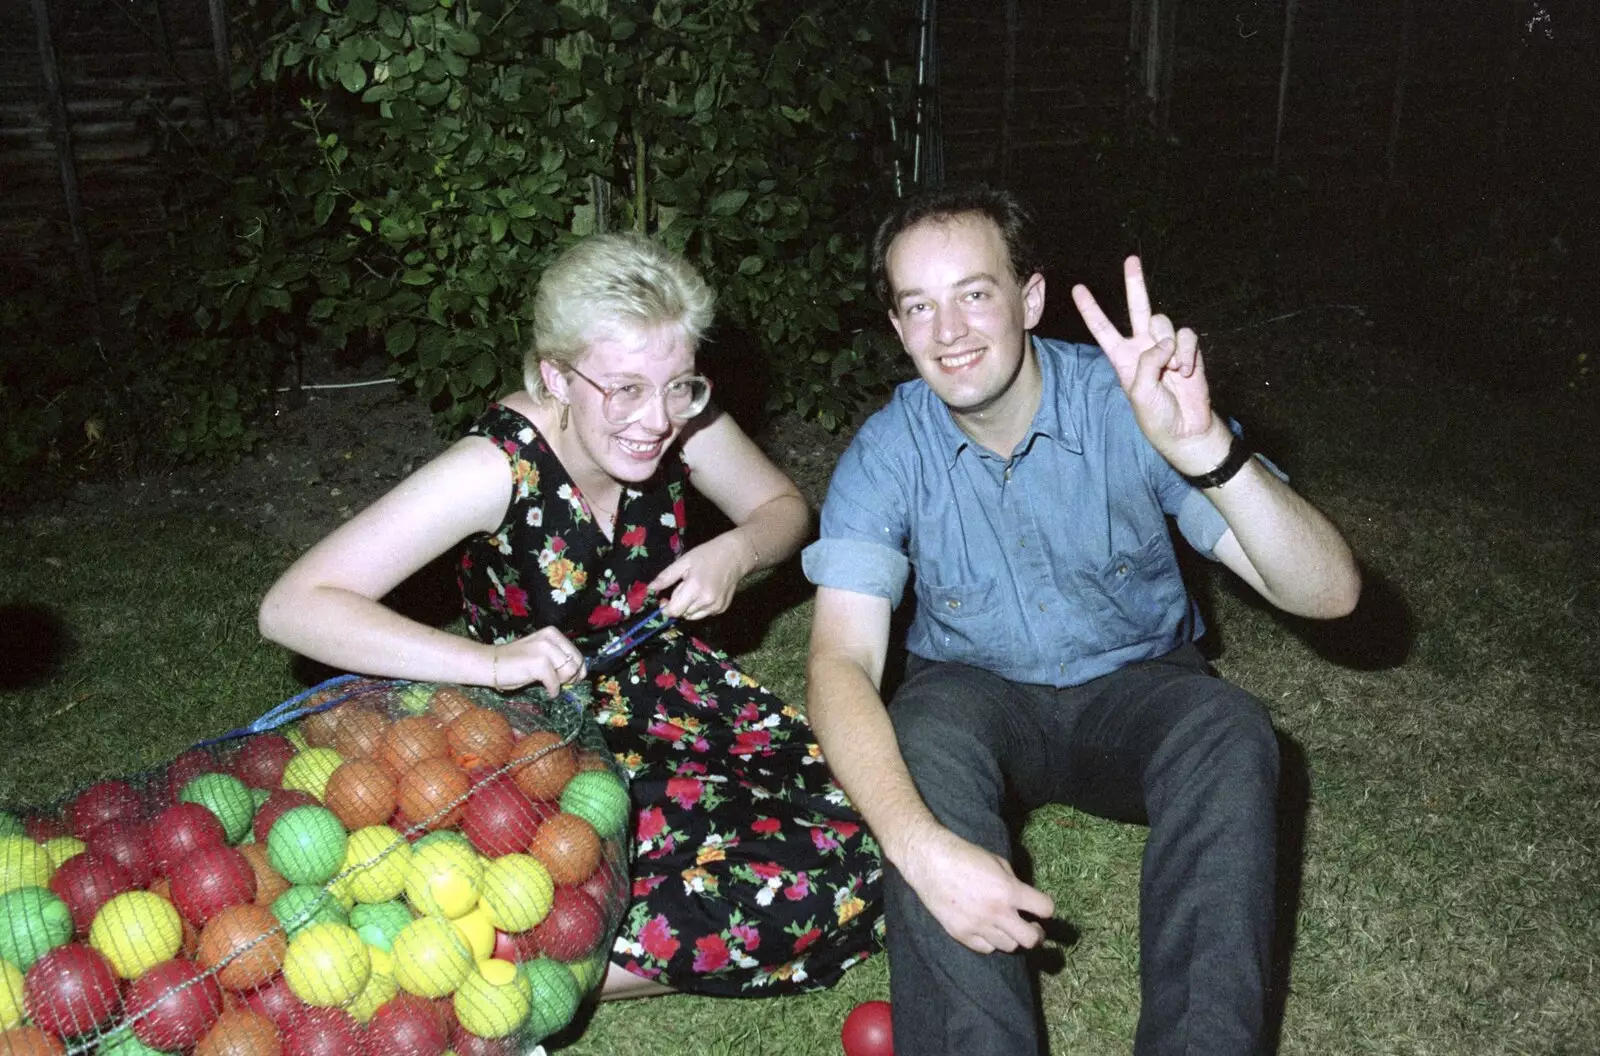 Graham Seage, and his girlfriend, from Chris and Phil's Party, Hordle, Hampshire - 6th September 1989